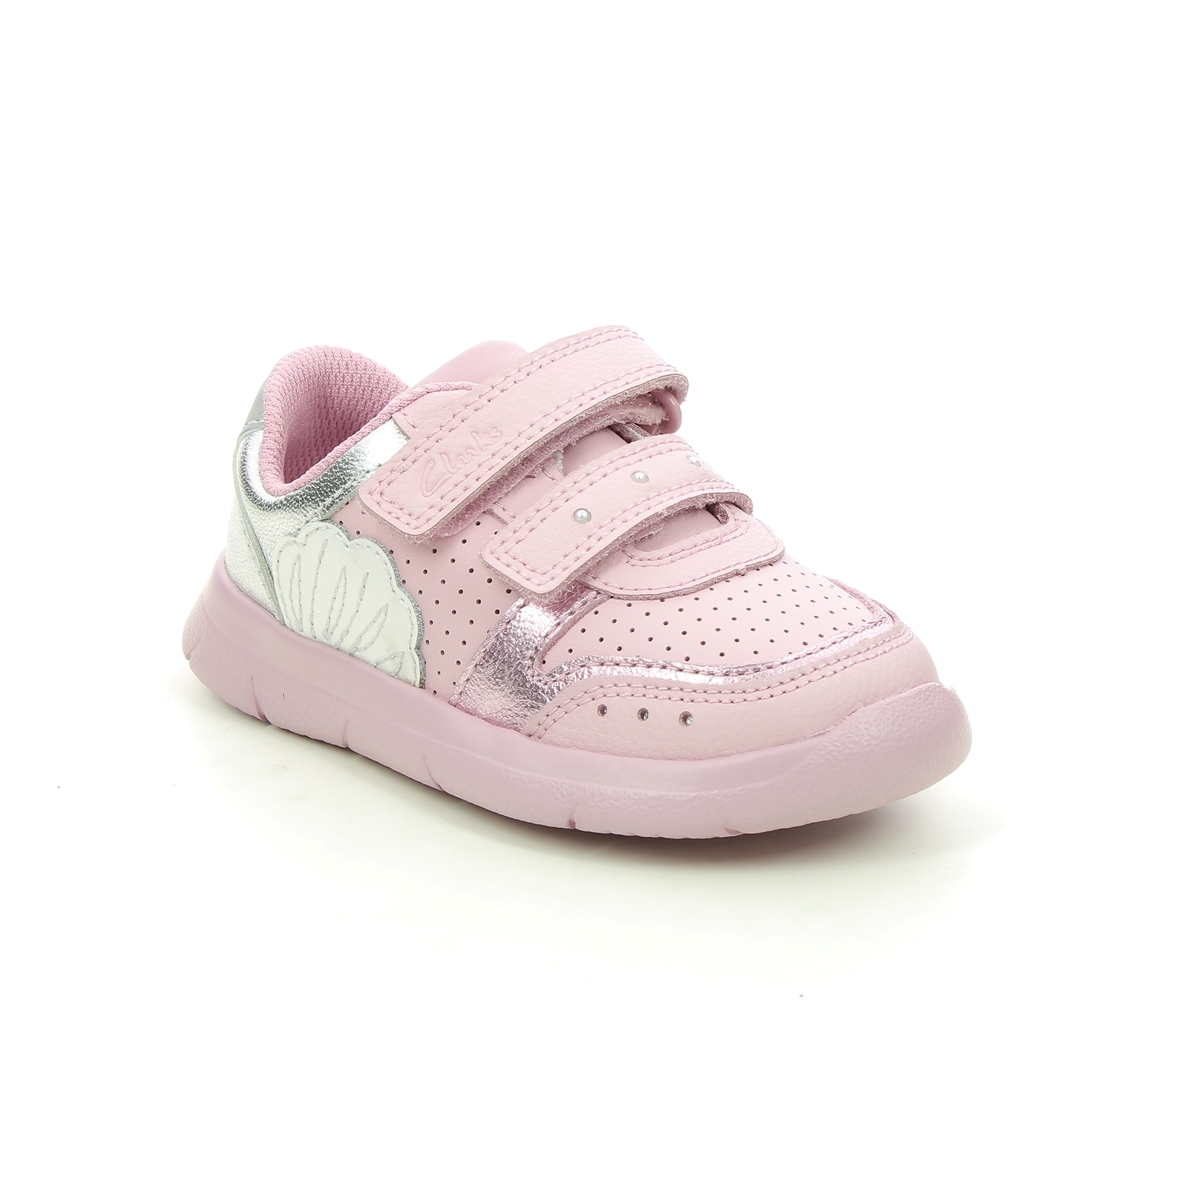 Clarks Ath Shell T Pink Leather Kids Toddler Girls Trainers 588097G In Size 8.5 In Plain Pink Leather G Width Fitting For kids